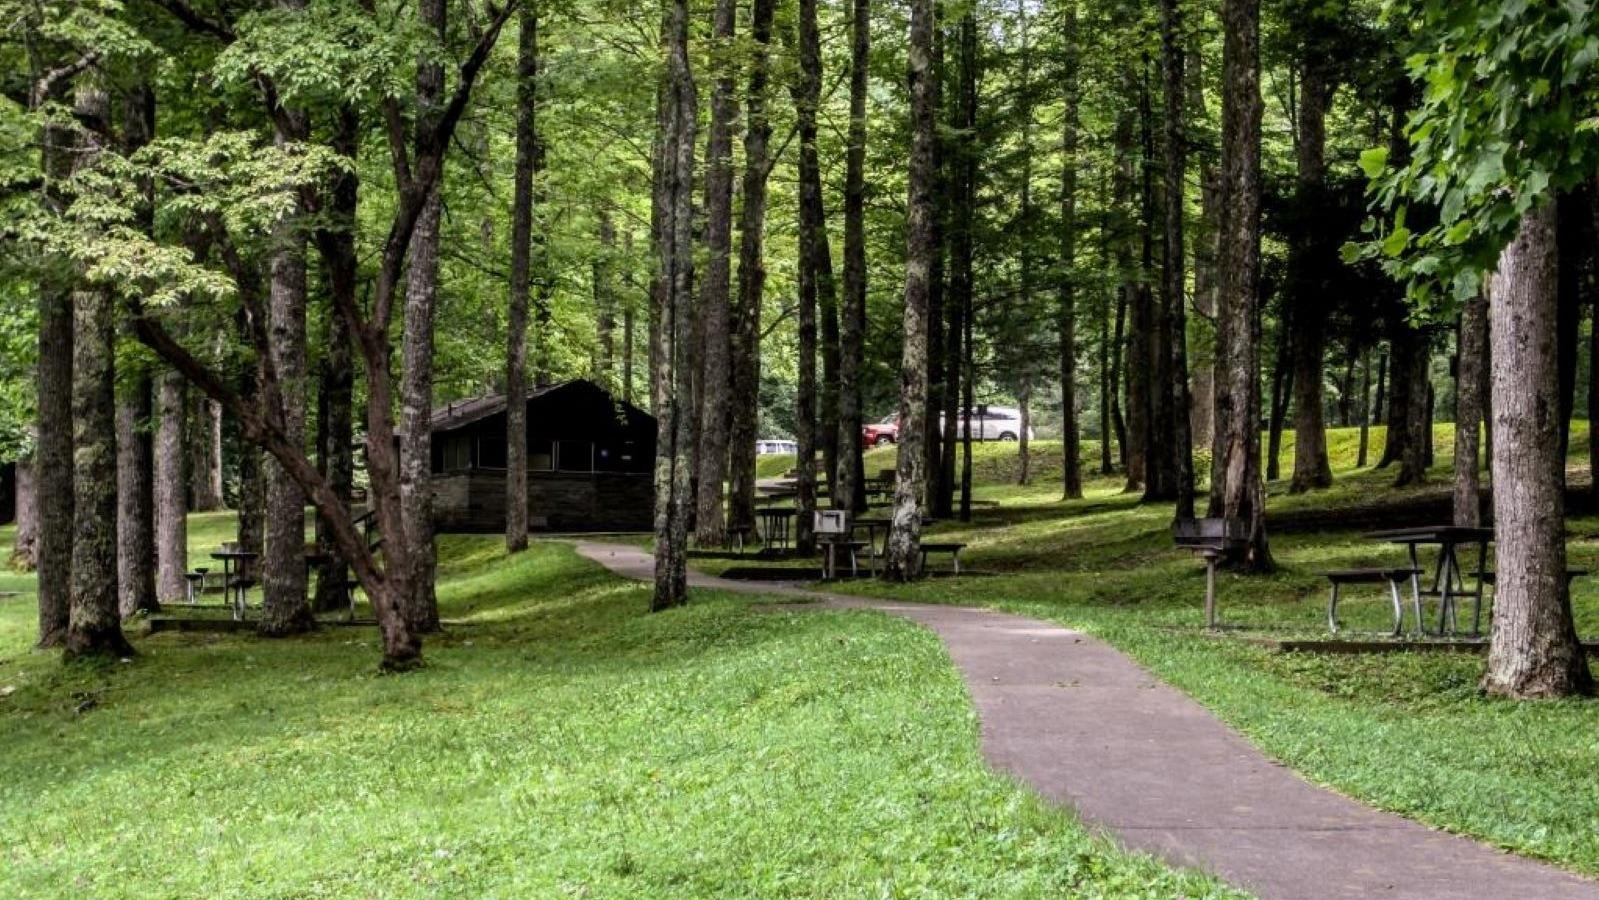 Foreground grass and a sidewalk to picnic tables, grills, and a restroom facility all among trees